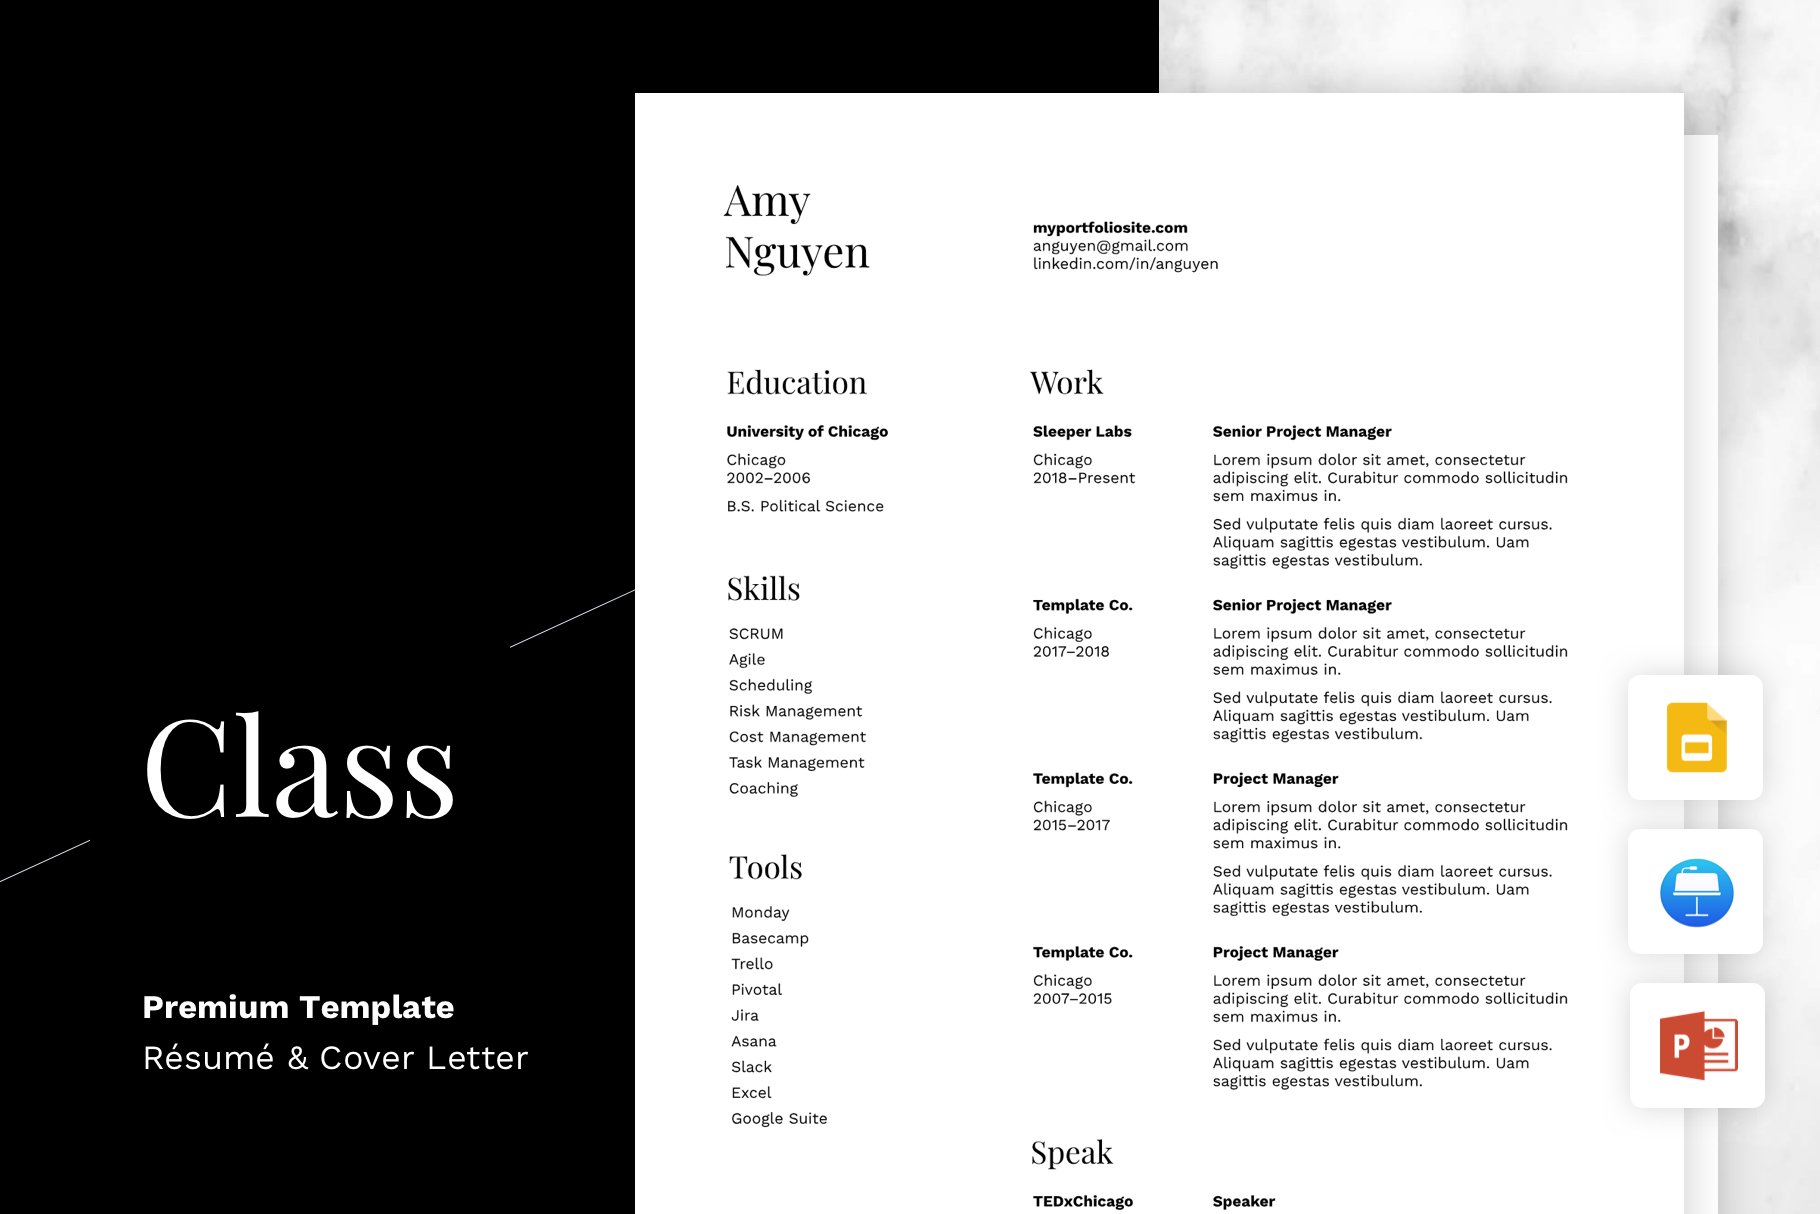 Class - Resume and Cover Letter cover image.